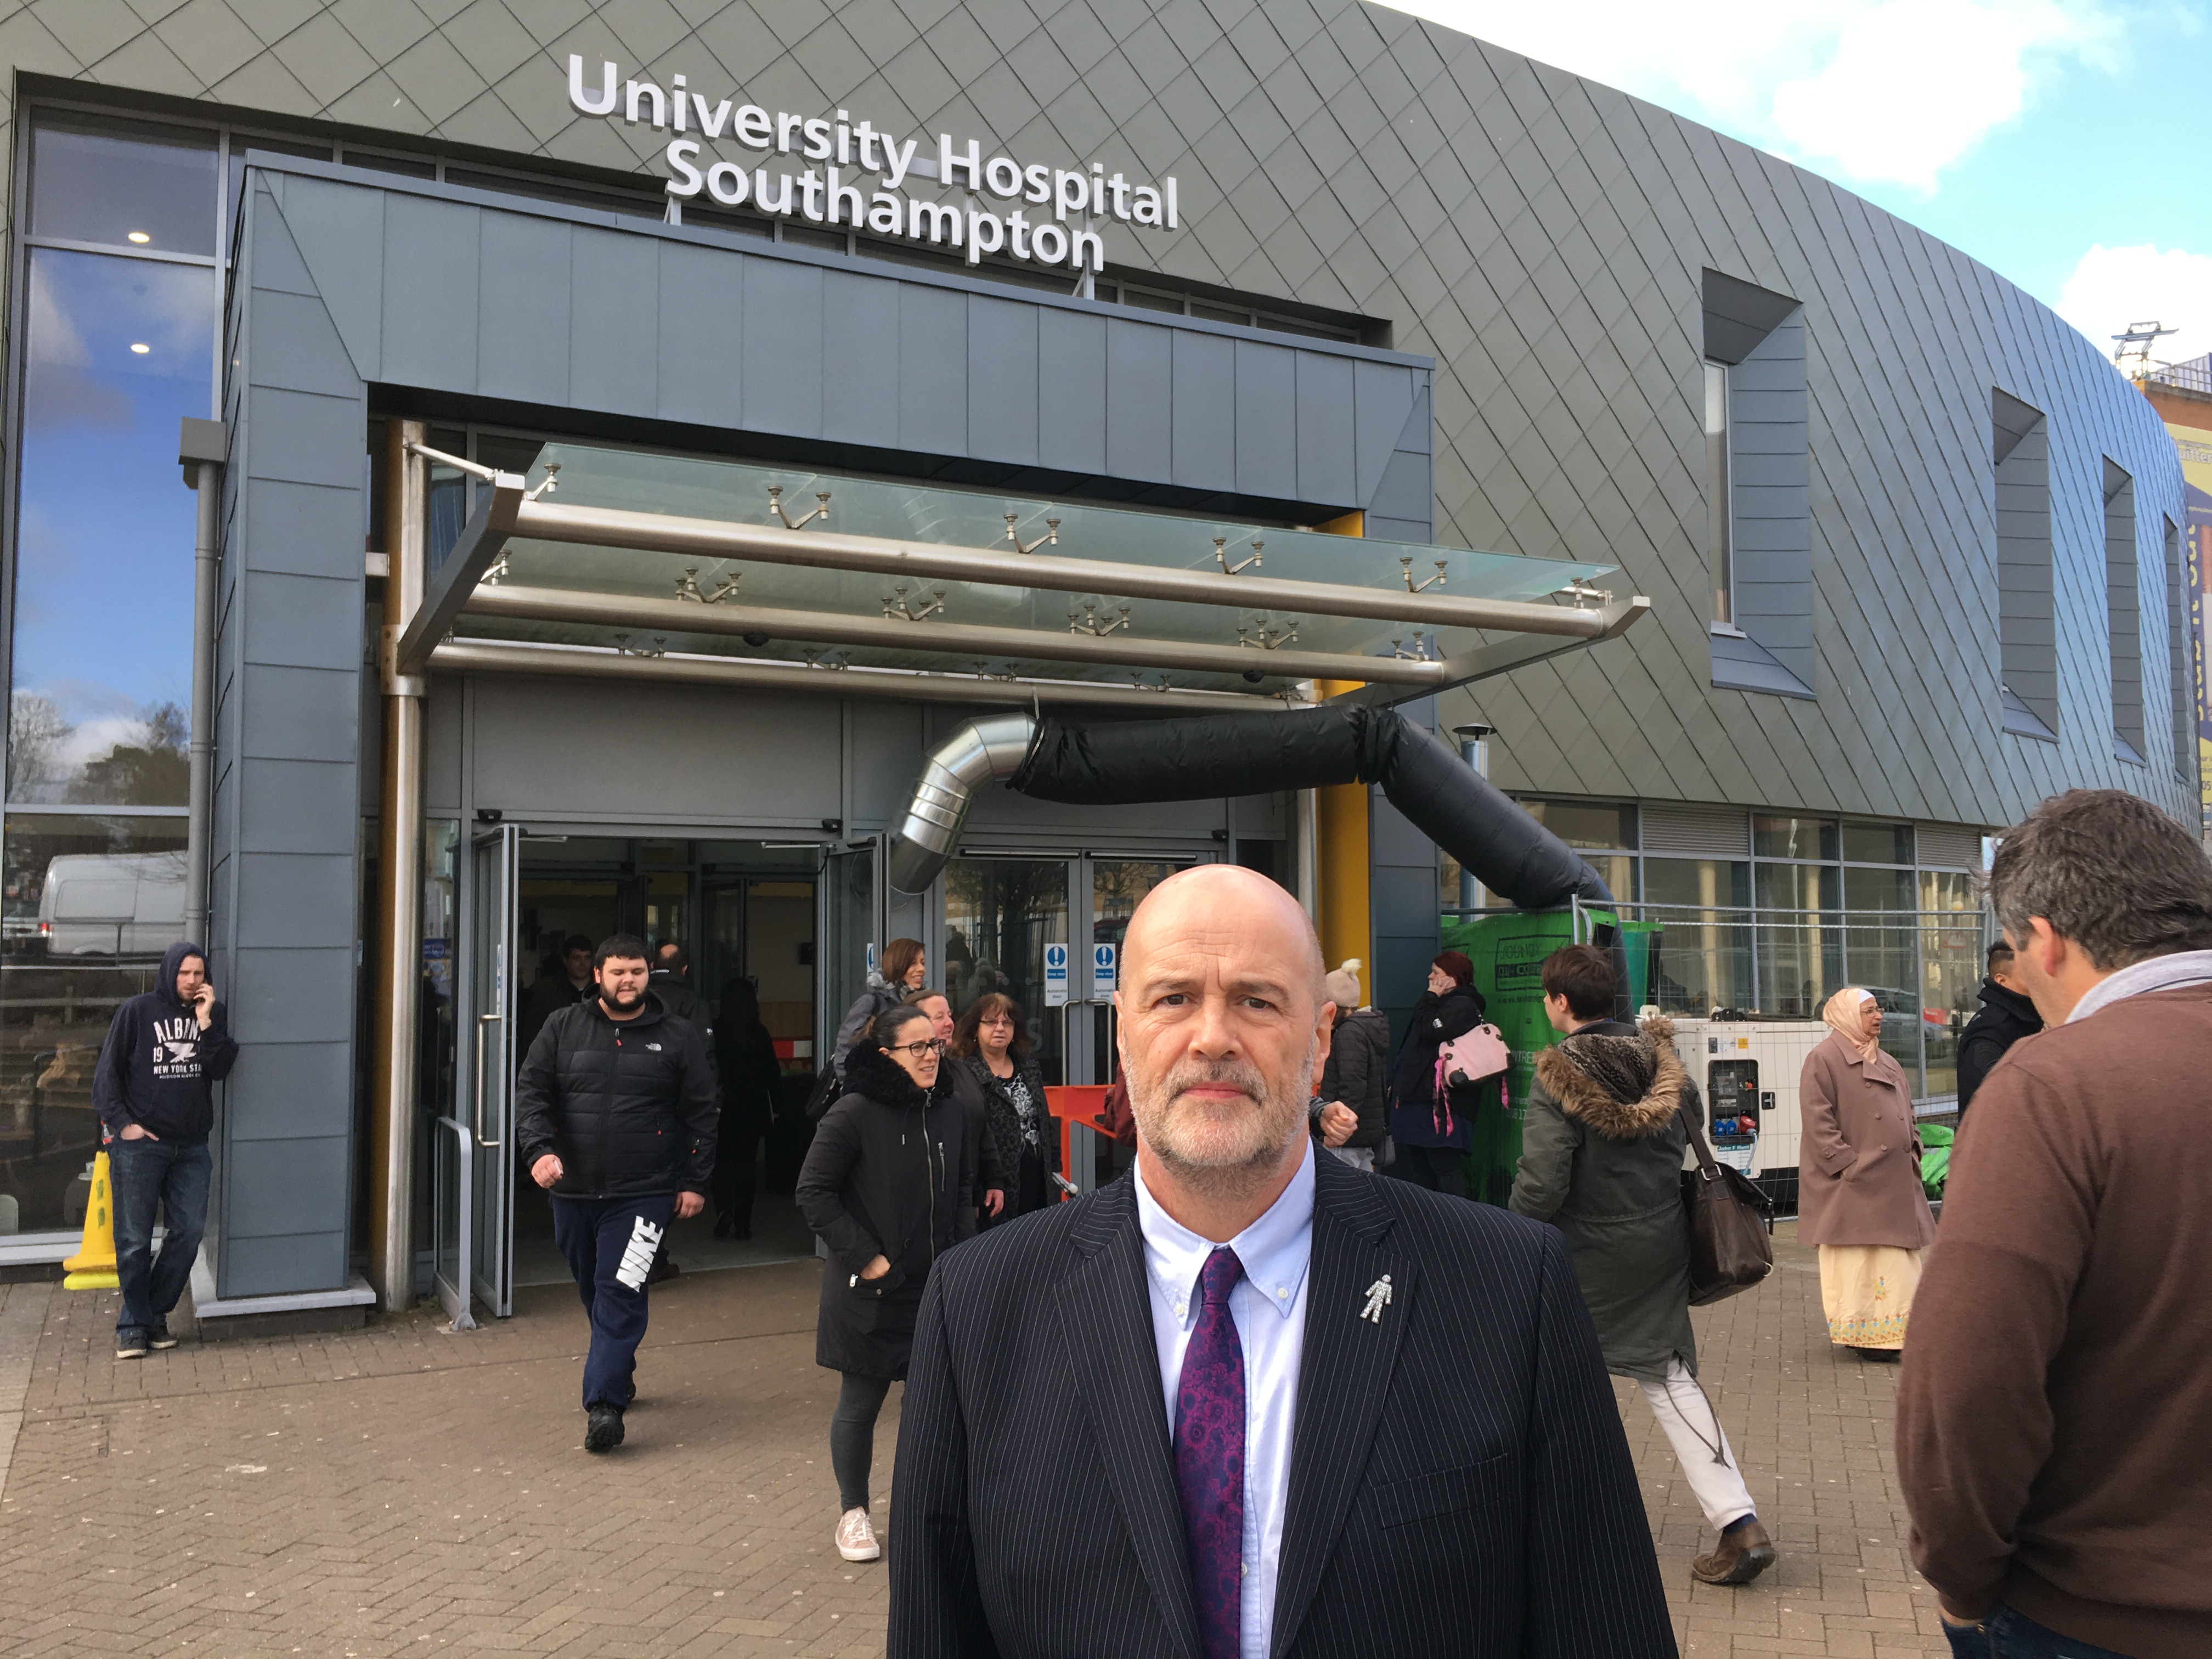 Brexit Undermining Clincial Research at Southampton University Hospital